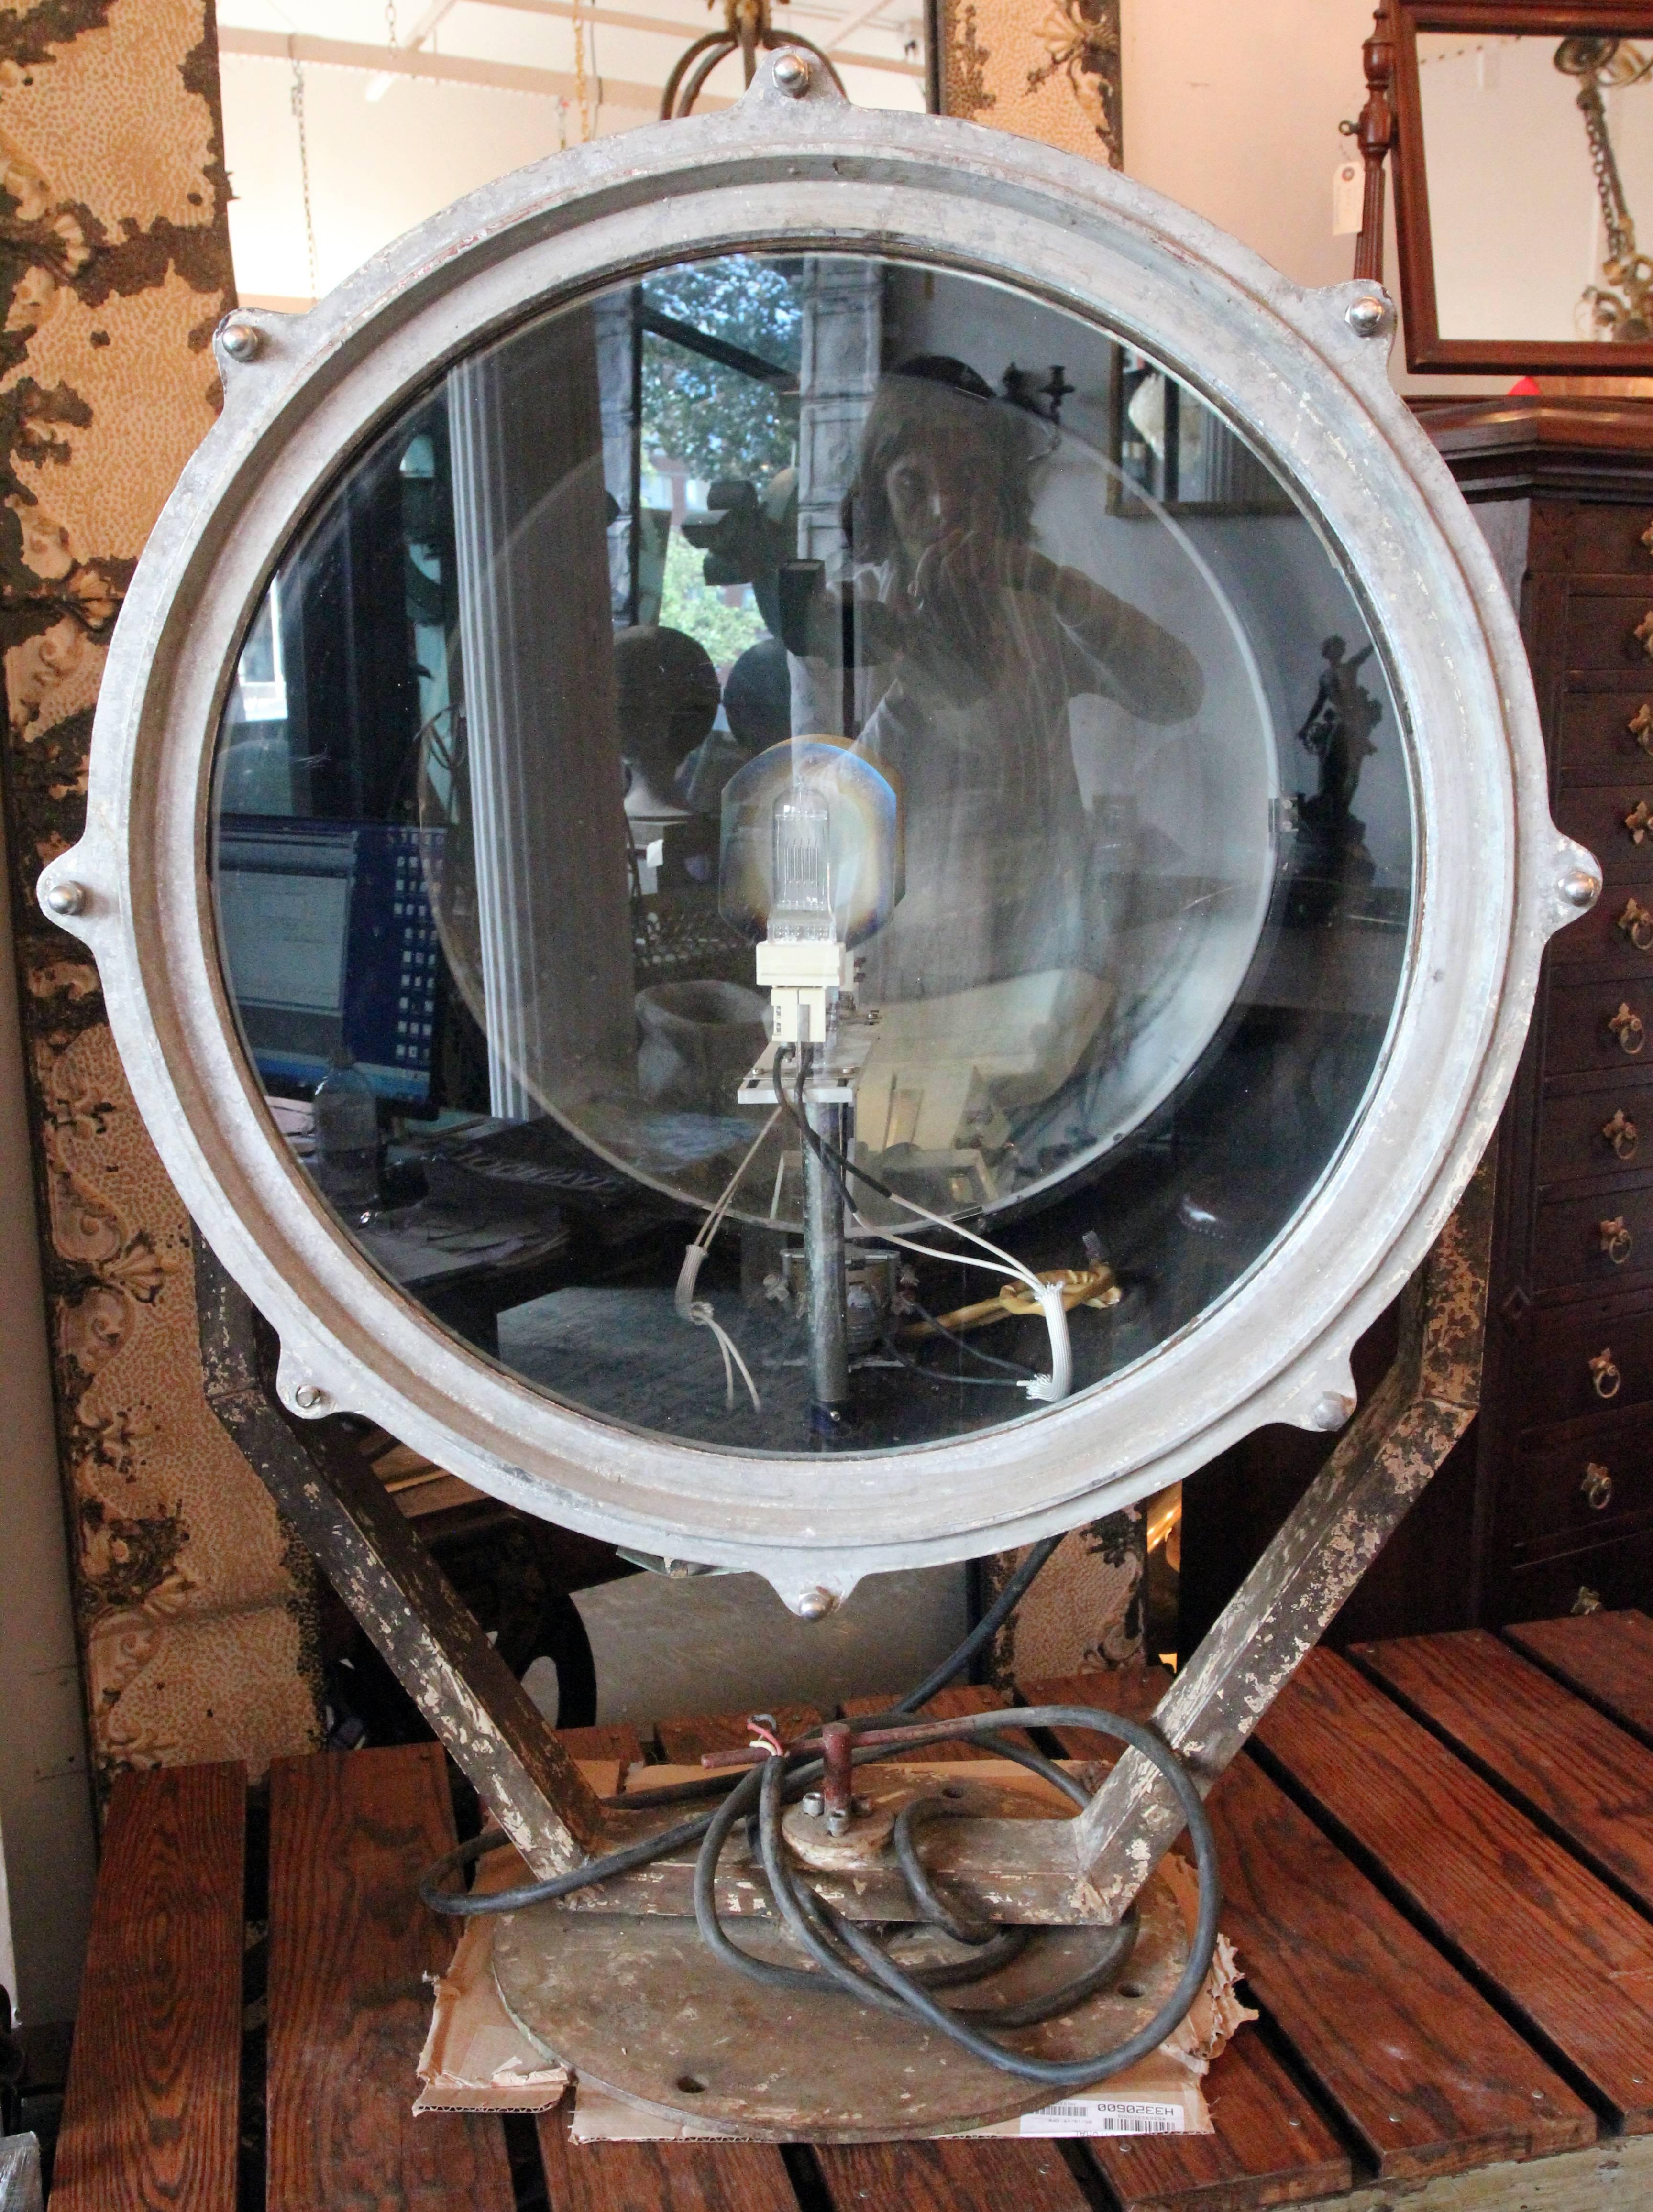 1960s adjustable steel lighthouse spotlight. In great condition. This can be seen at our 1800 South Grand Ave location in Downtown LA.